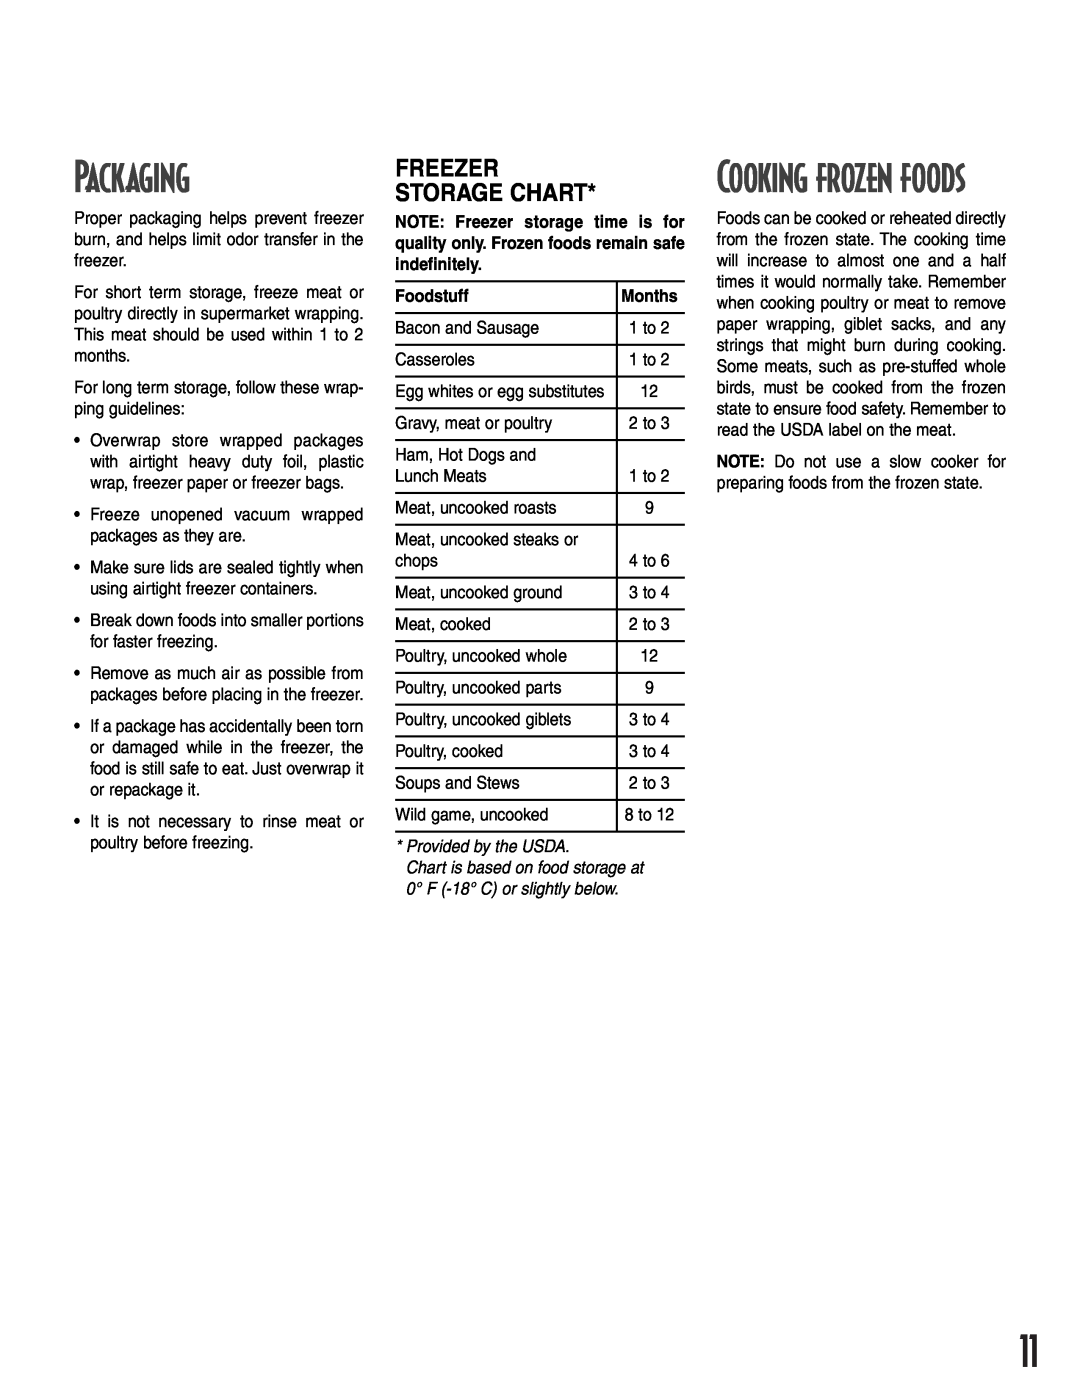 Amana 1-82034-002 Packaging, Cooking frozen foods, Freezer Storage Chart, Foodstuff, Months, Provided by the USDA 